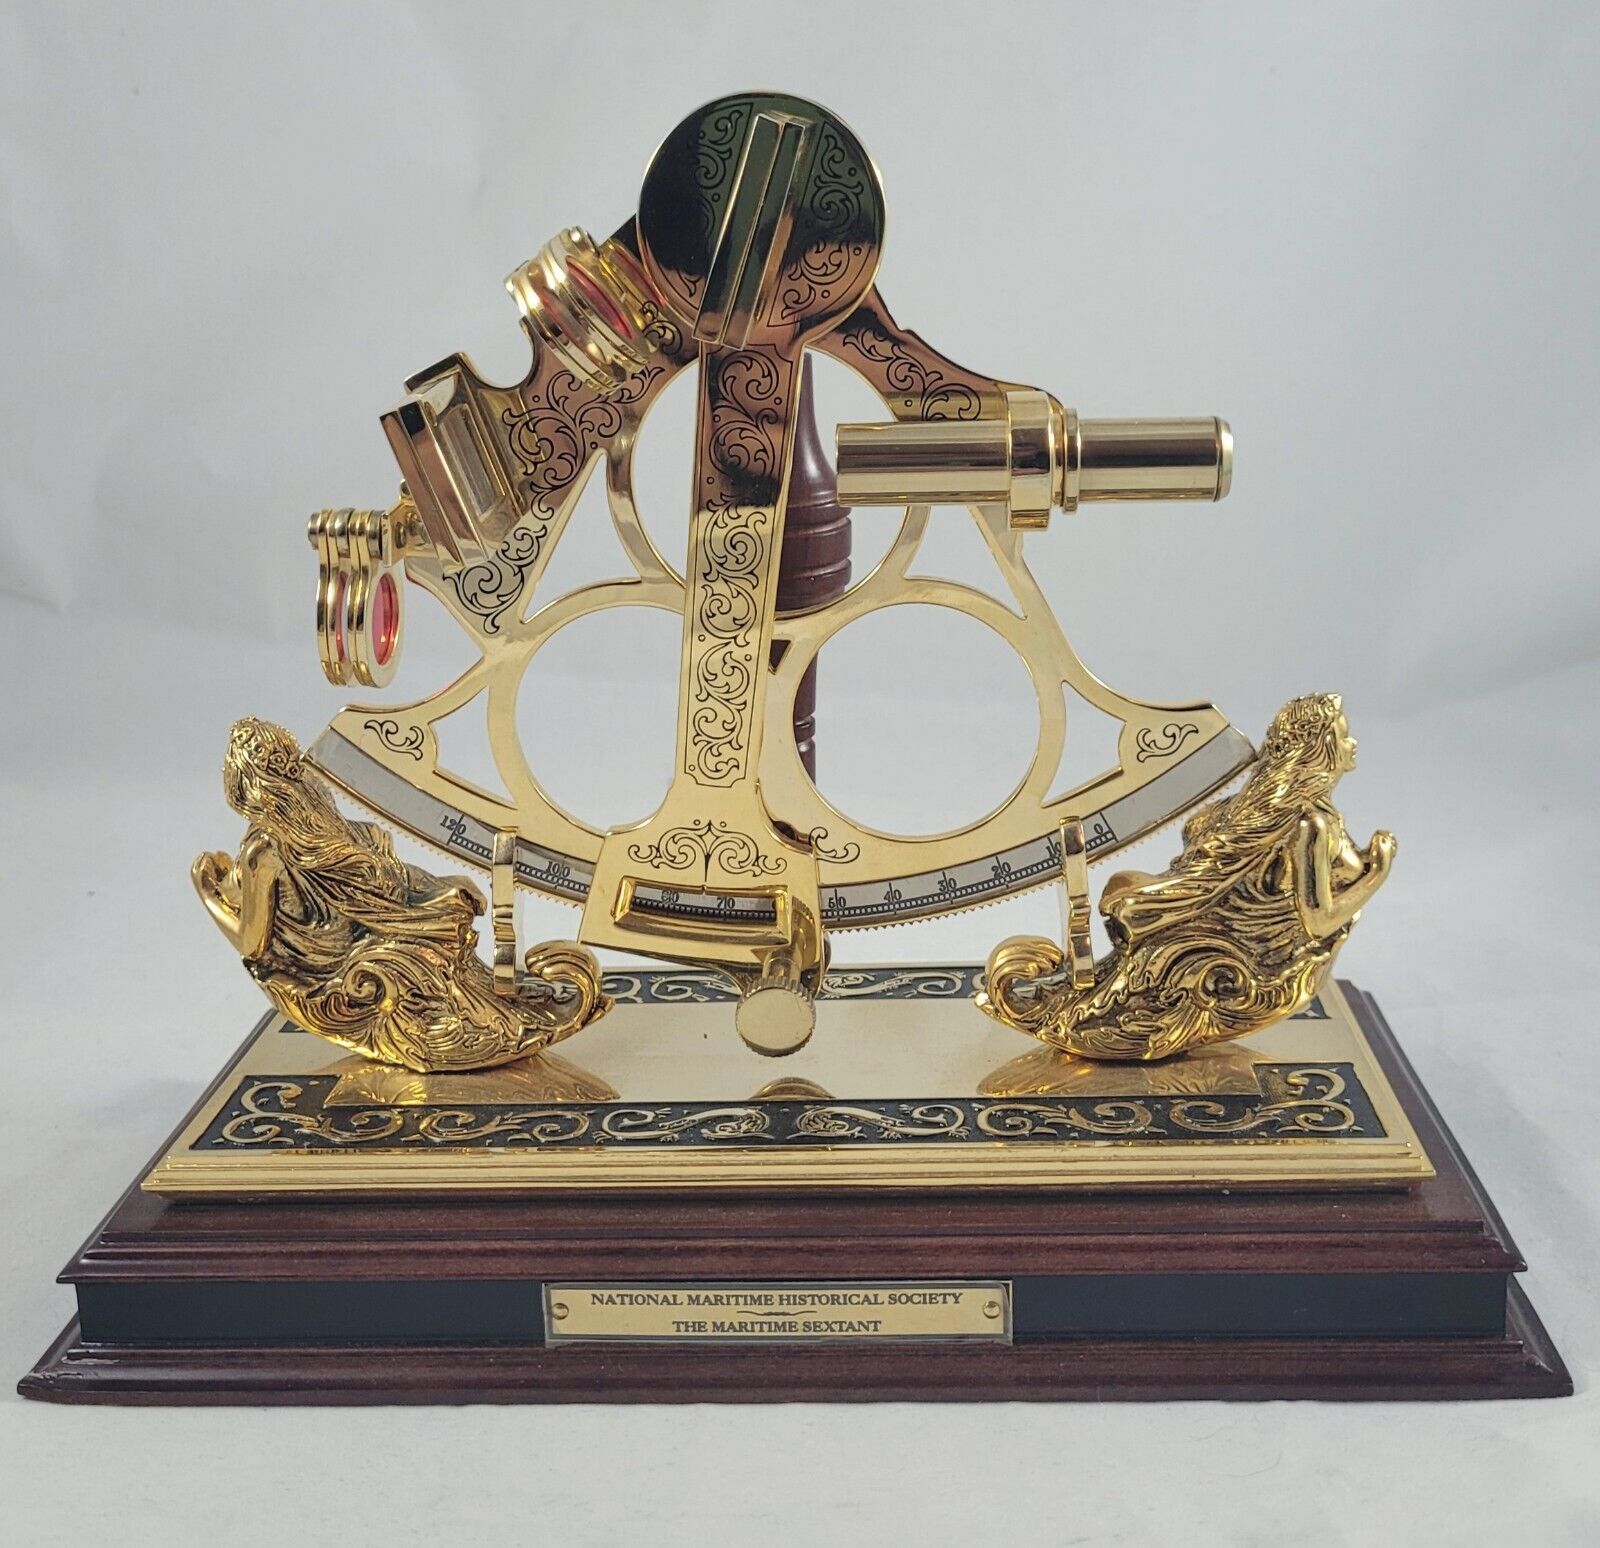 National Maritime Historical Society The Maritime Sextant Franklin Mint Brass